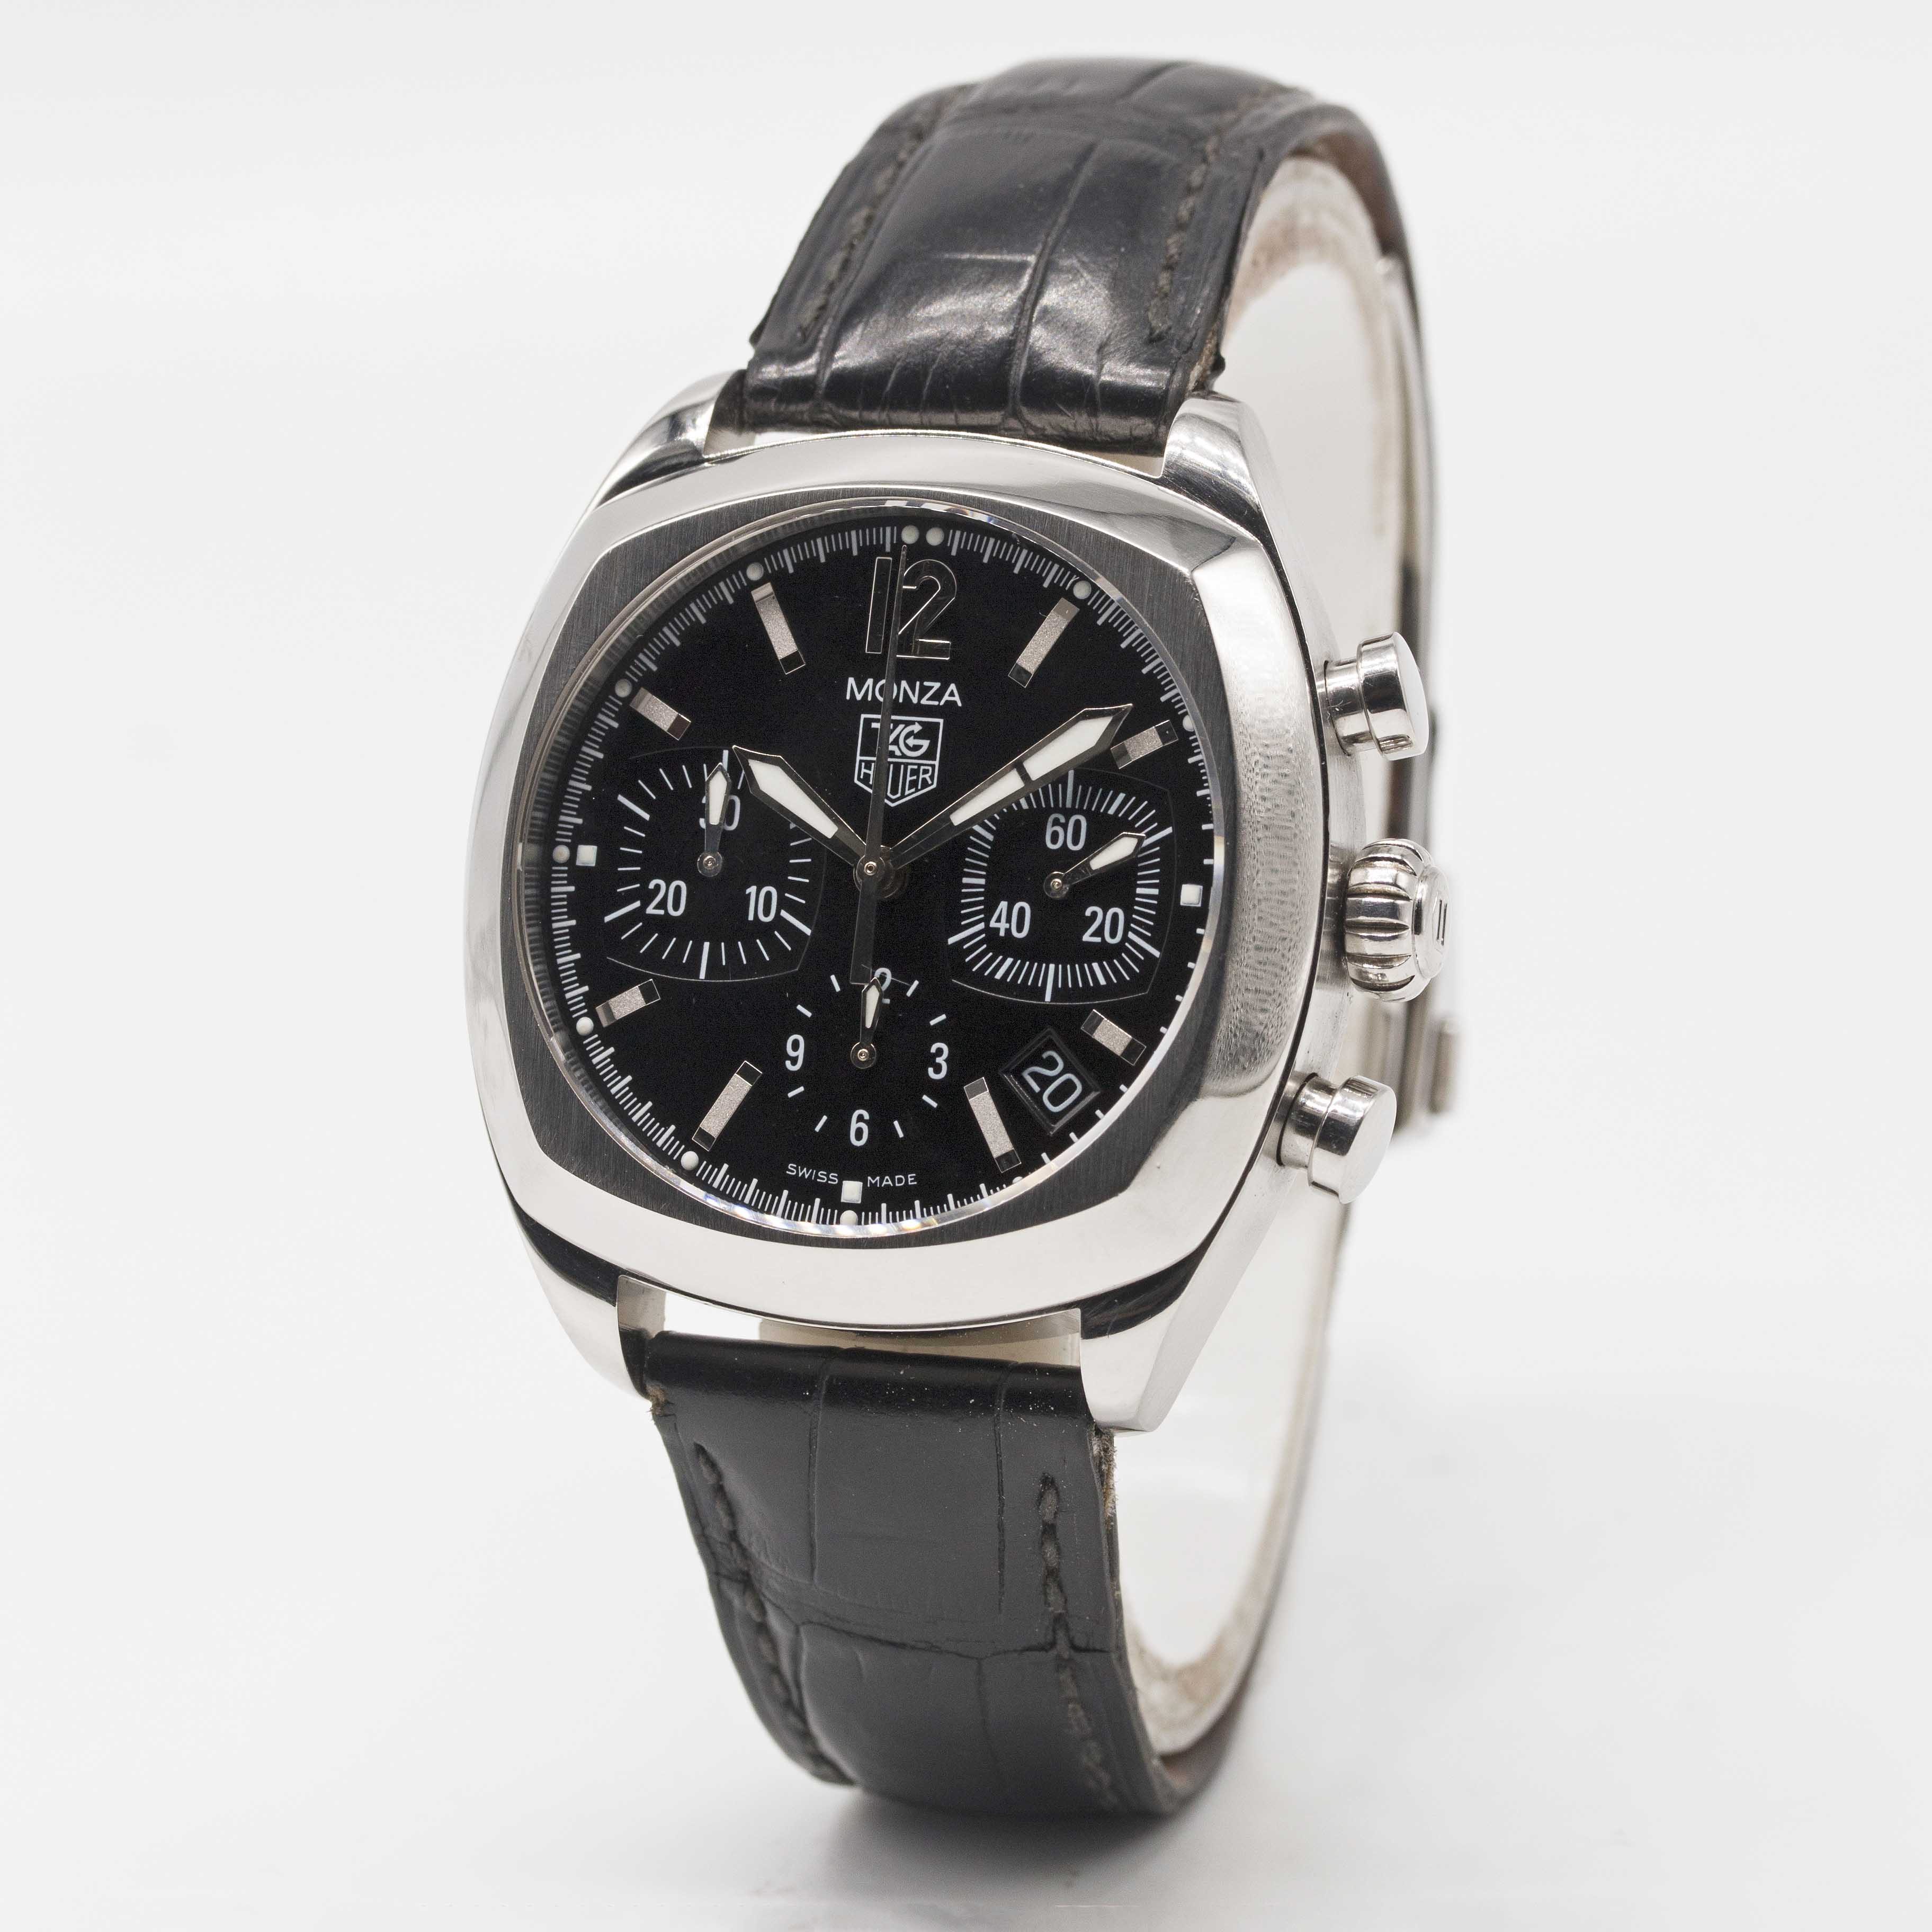 A GENTLEMAN'S STAINLESS STEEL TAG HEUER MONZA CHRONOGRAPH WRIST WATCH CIRCA 2005, REF. CR2113-0 WITH - Image 3 of 6